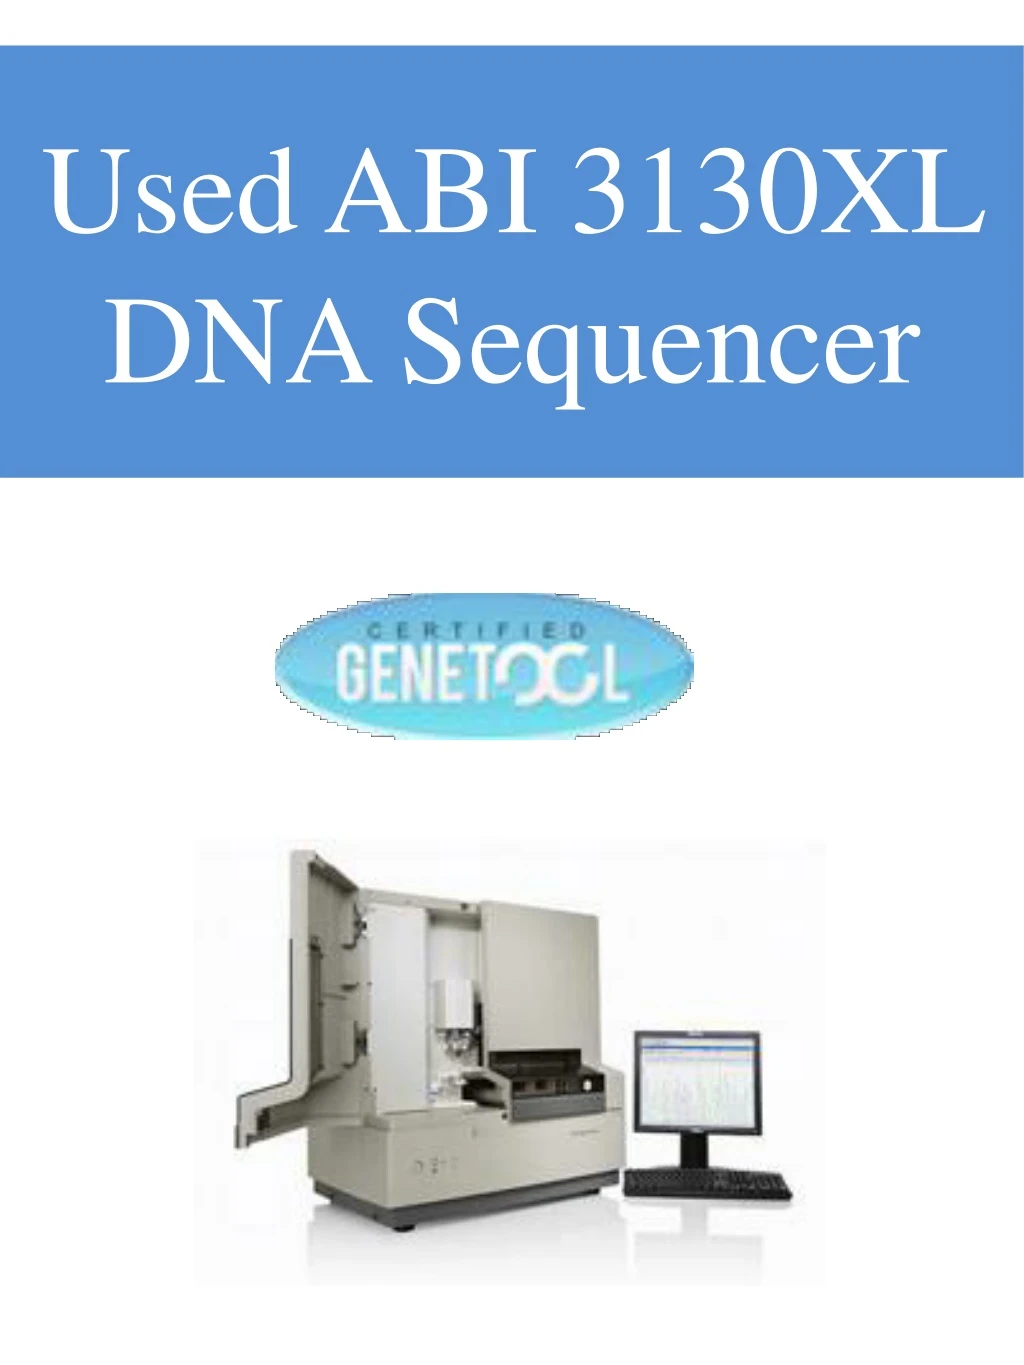 used abi 3130xl dna sequencer